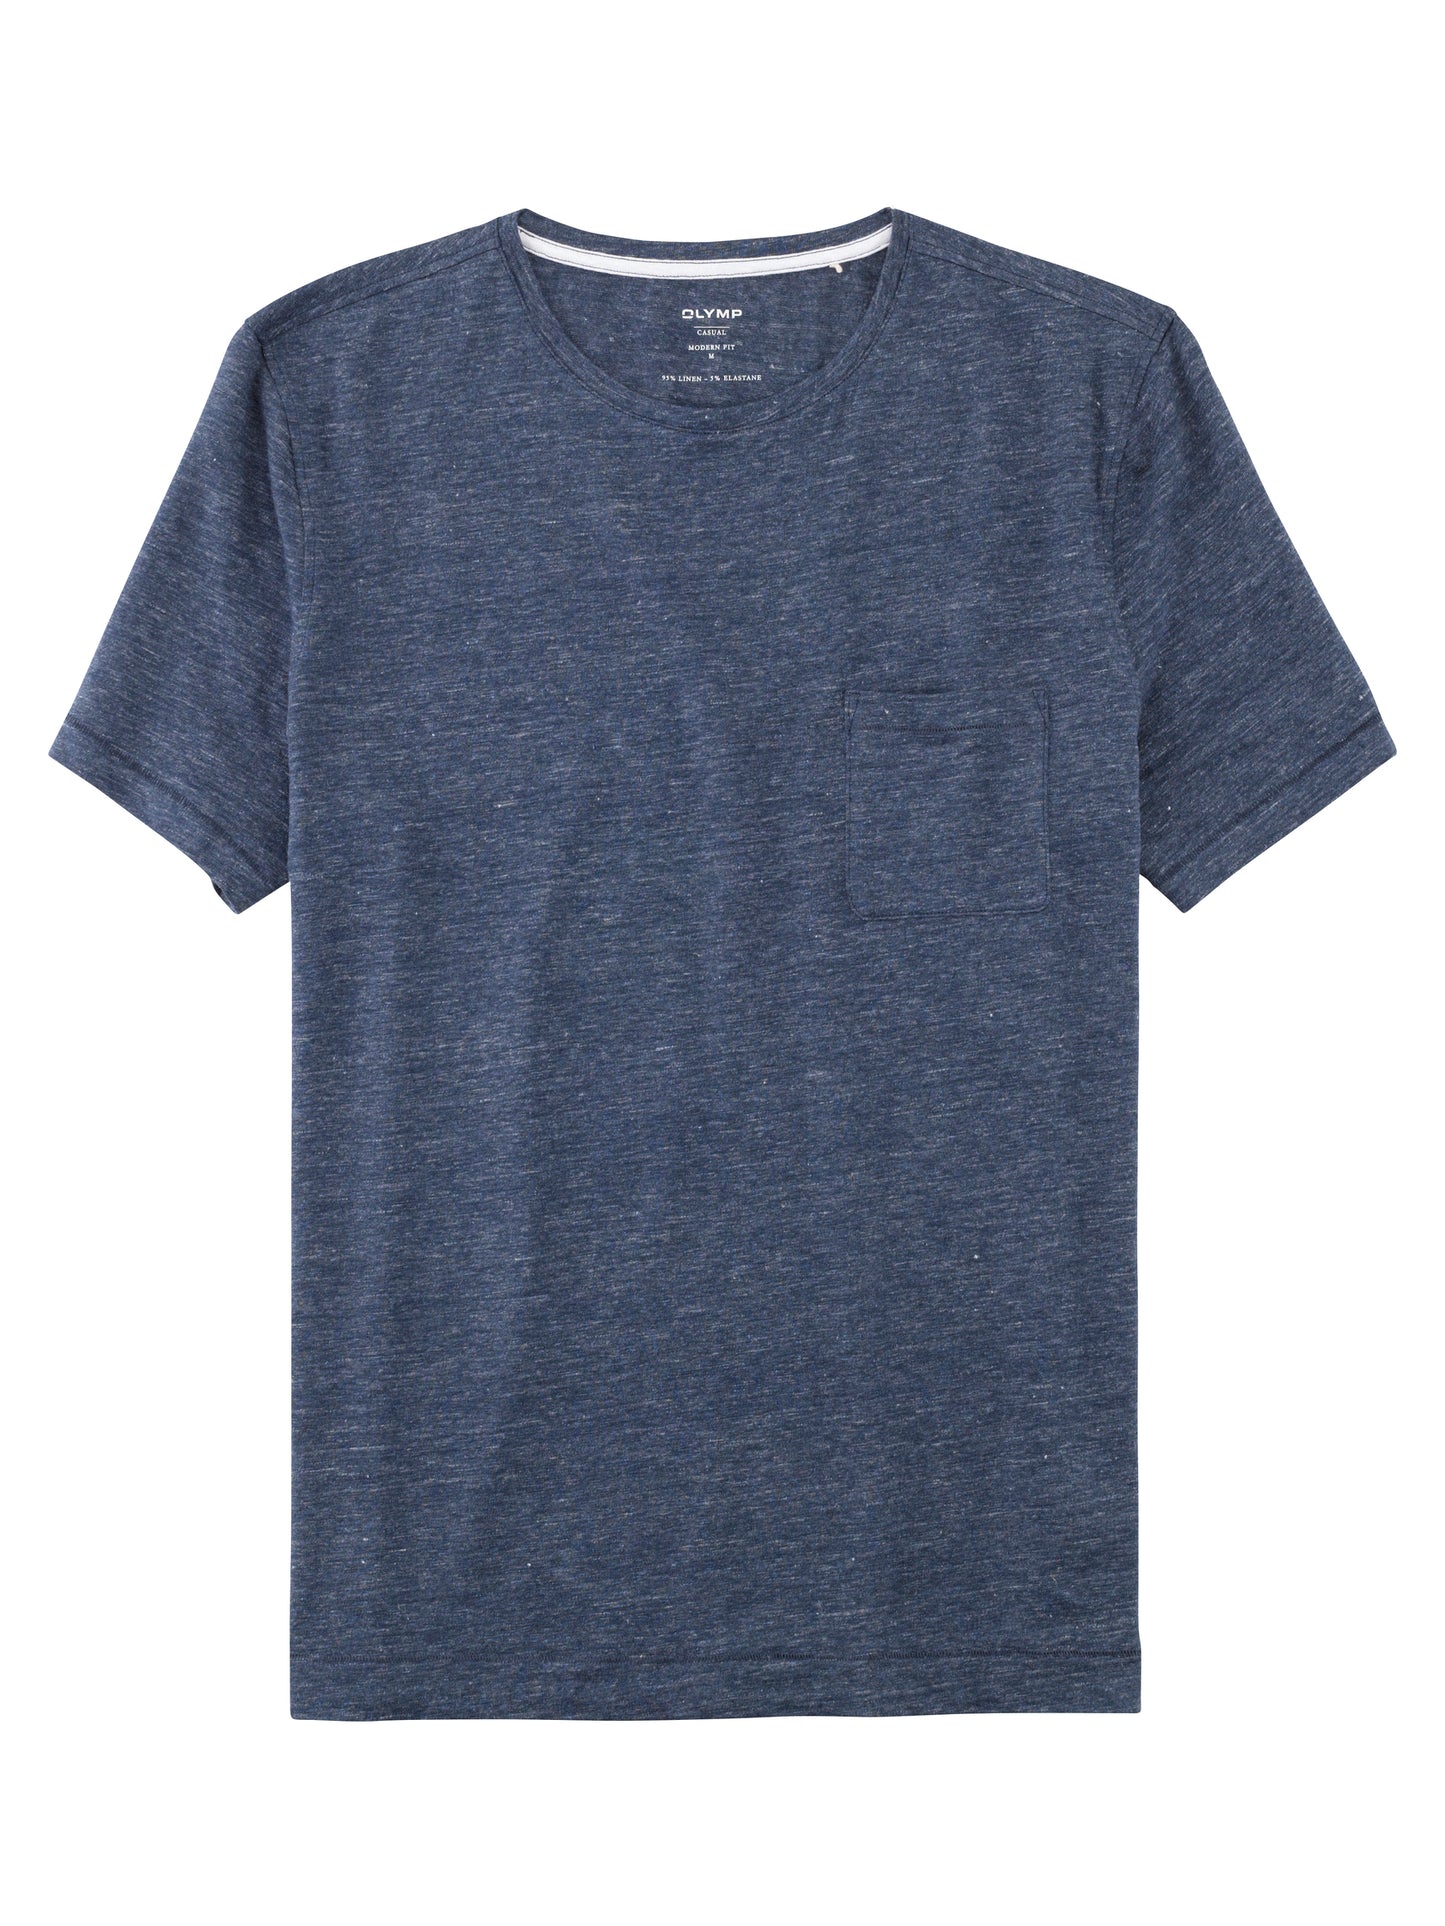 OLYMP Casual T-Shirt